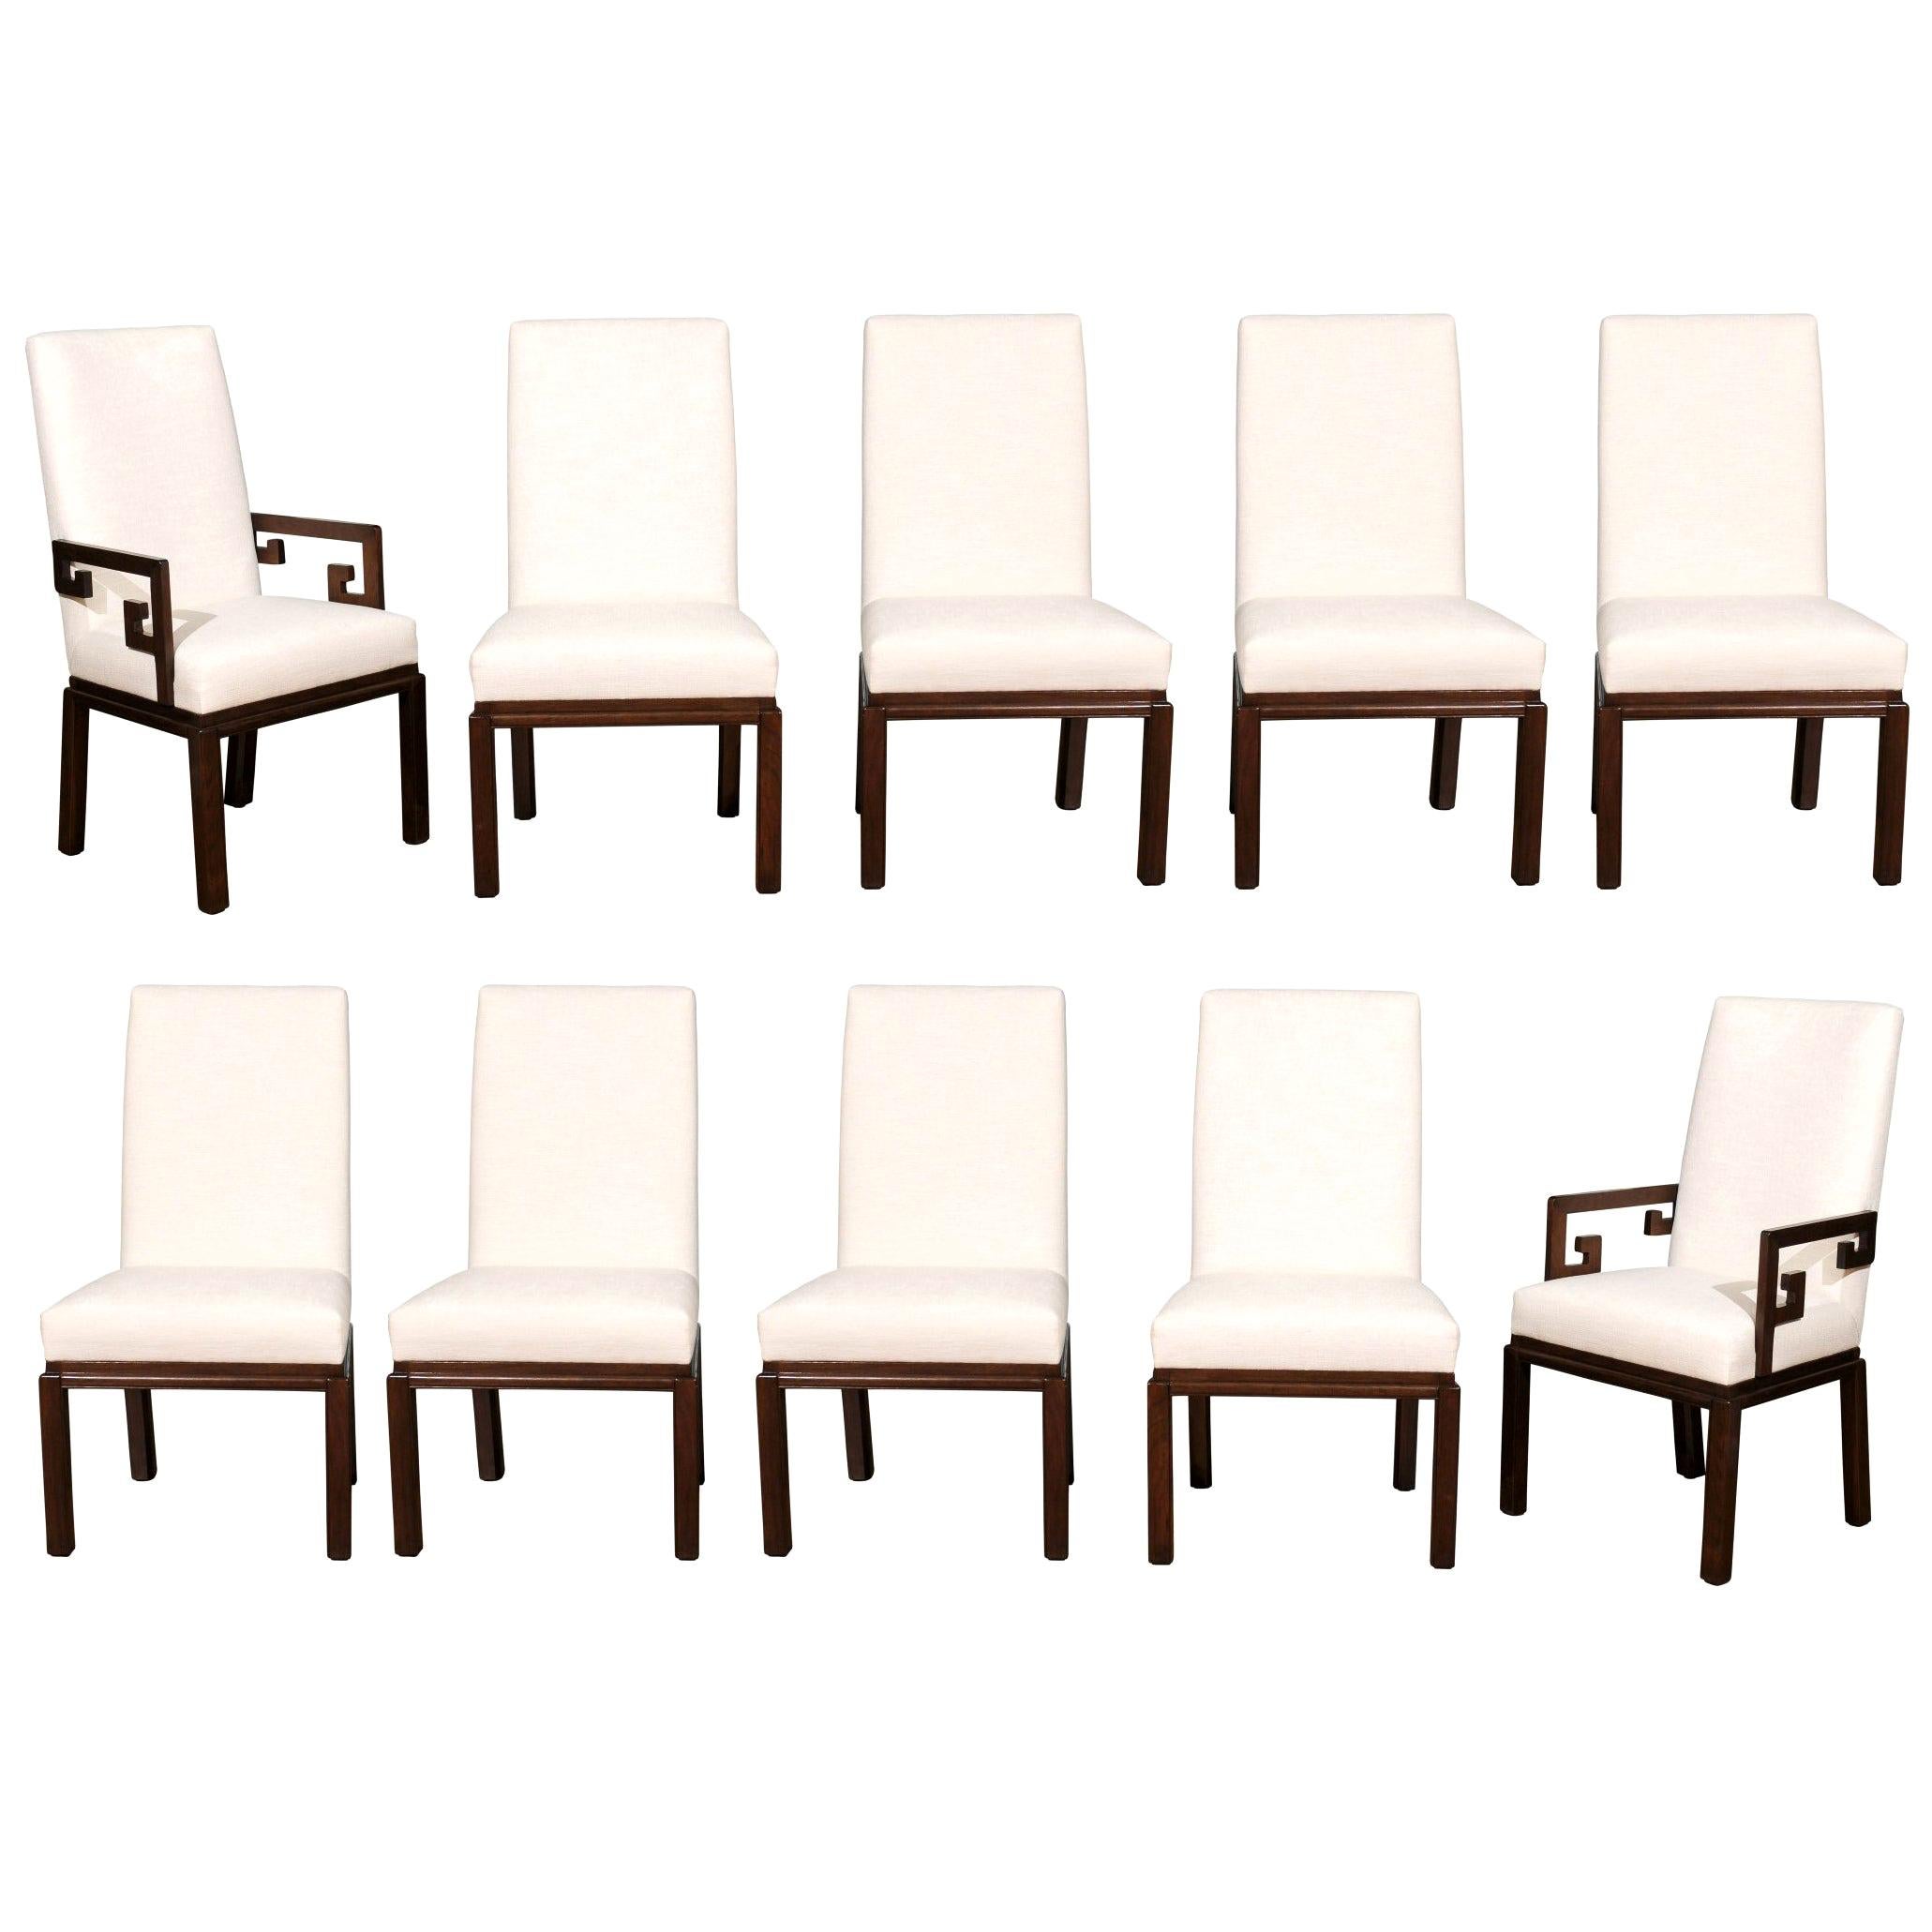 Elegant Set of 12 Parsons Dining Chairs by Michael Taylor for Baker, circa 1970